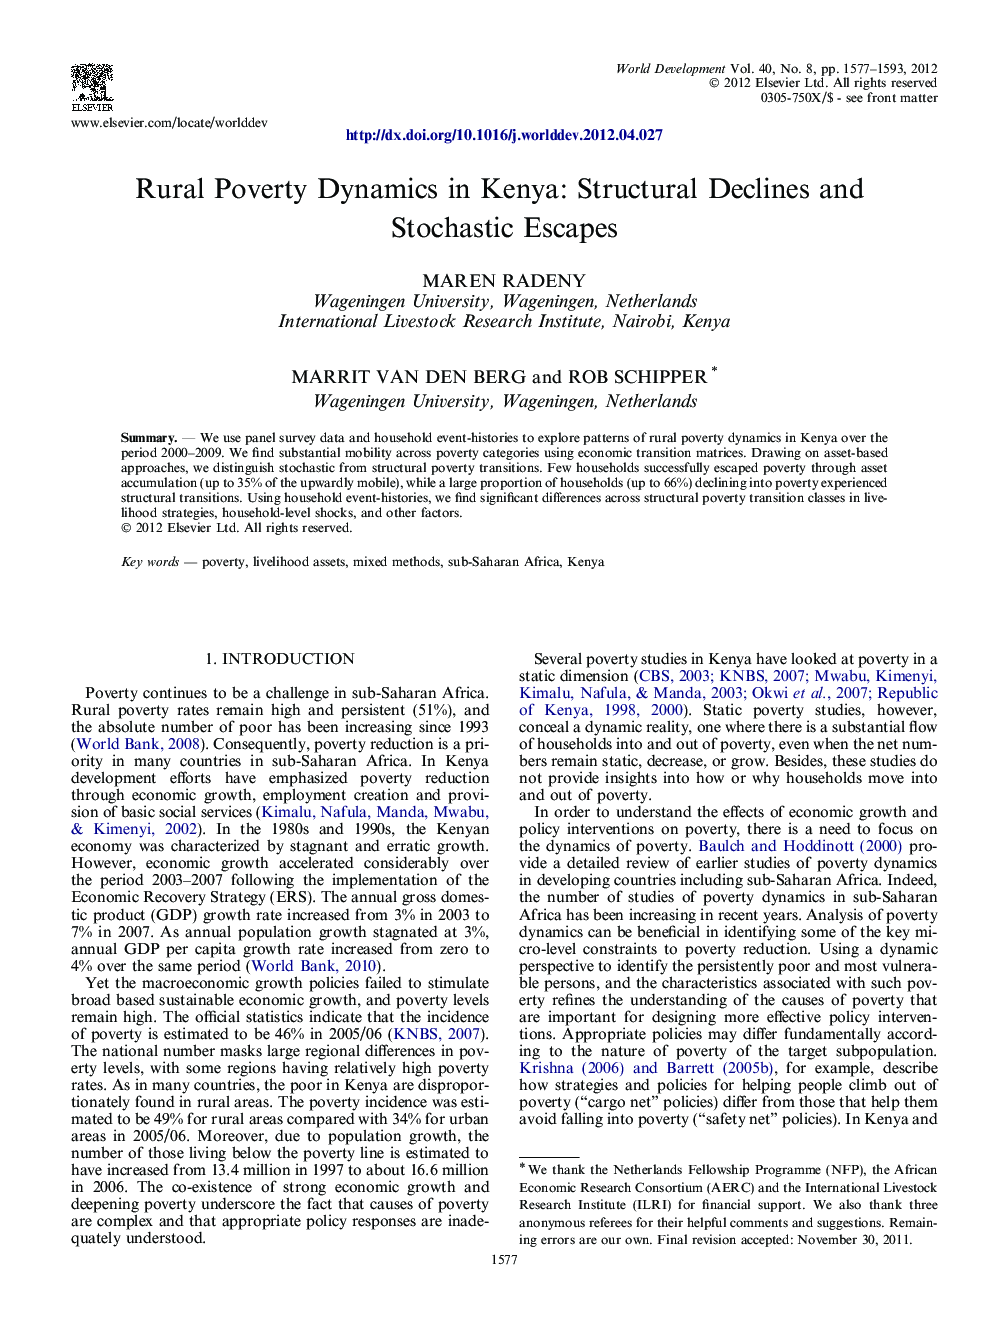 Rural Poverty Dynamics in Kenya: Structural Declines and Stochastic Escapes